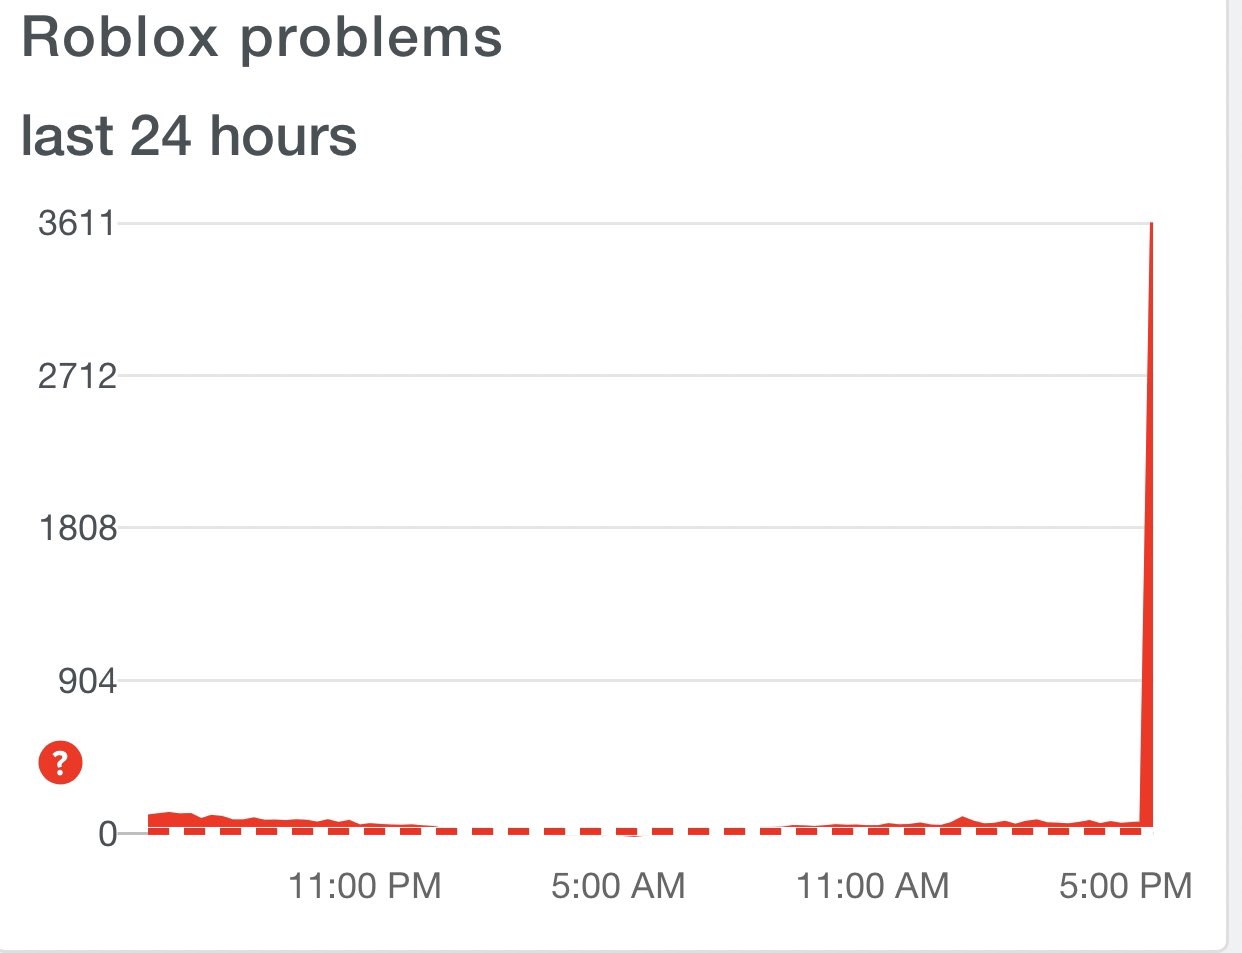 Rtc On Twitter Roblox Is Currently Down For A Lot Of People Right Now Roblox Seems To Be Experiencing A Lot Of Problems With Their Site In The Past Few Days Https T Co Hd2z1hn8yl - rtc on twitter roblox is currently down for a lot of people right now roblox seems to be experiencing a lot of problems with their site in the past few days https t co hd2z1hn8yl